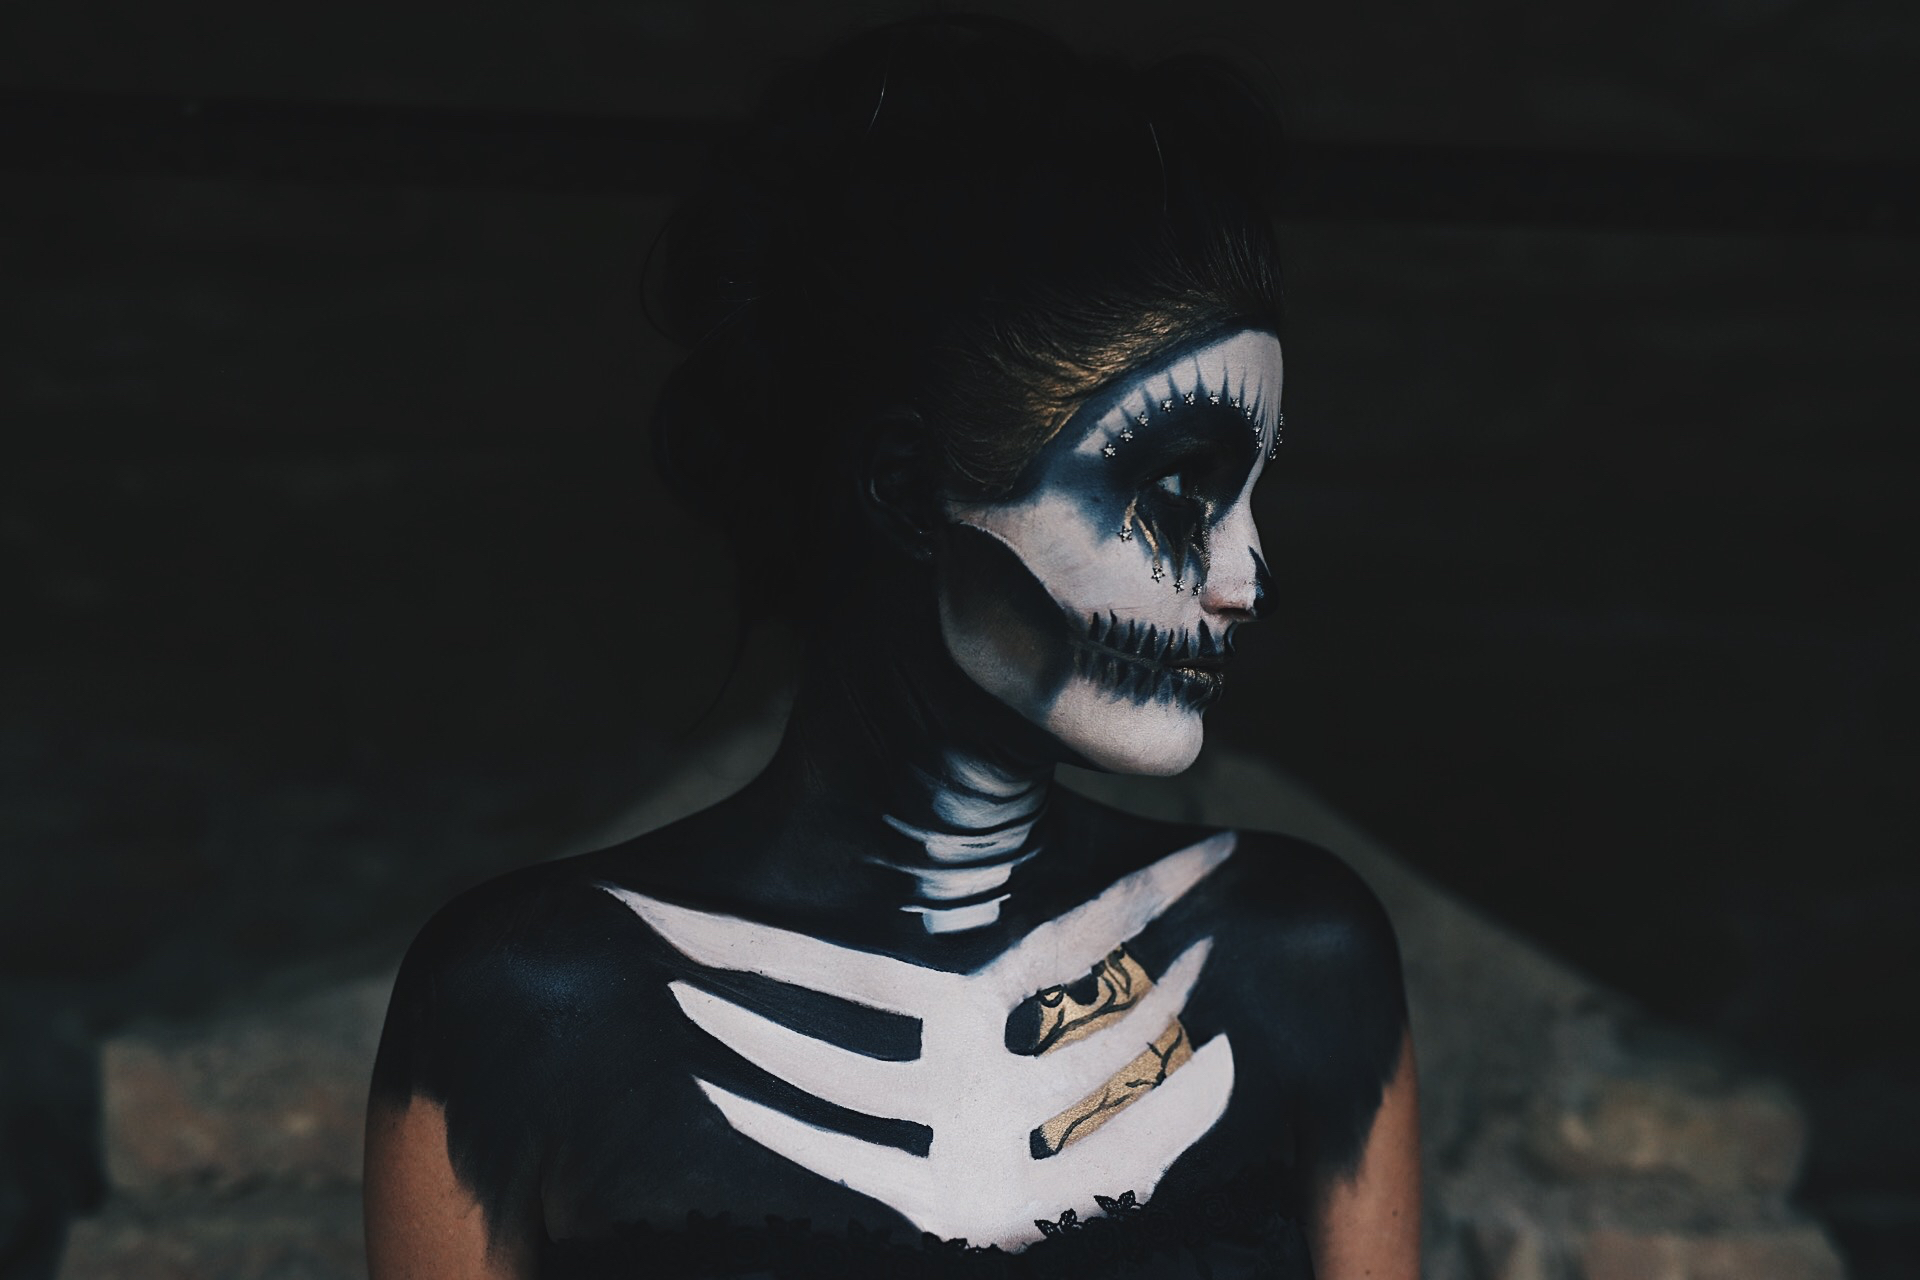 Austin Blogger DTKAustin shares her sexy skeleton costume with full face and body paint for Halloween. | halloween makeup ideas | halloween costume ideas | how to do makeup for halloween | halloween inspired makeup ideas | makeup tips for halloween || Dressed to Kill